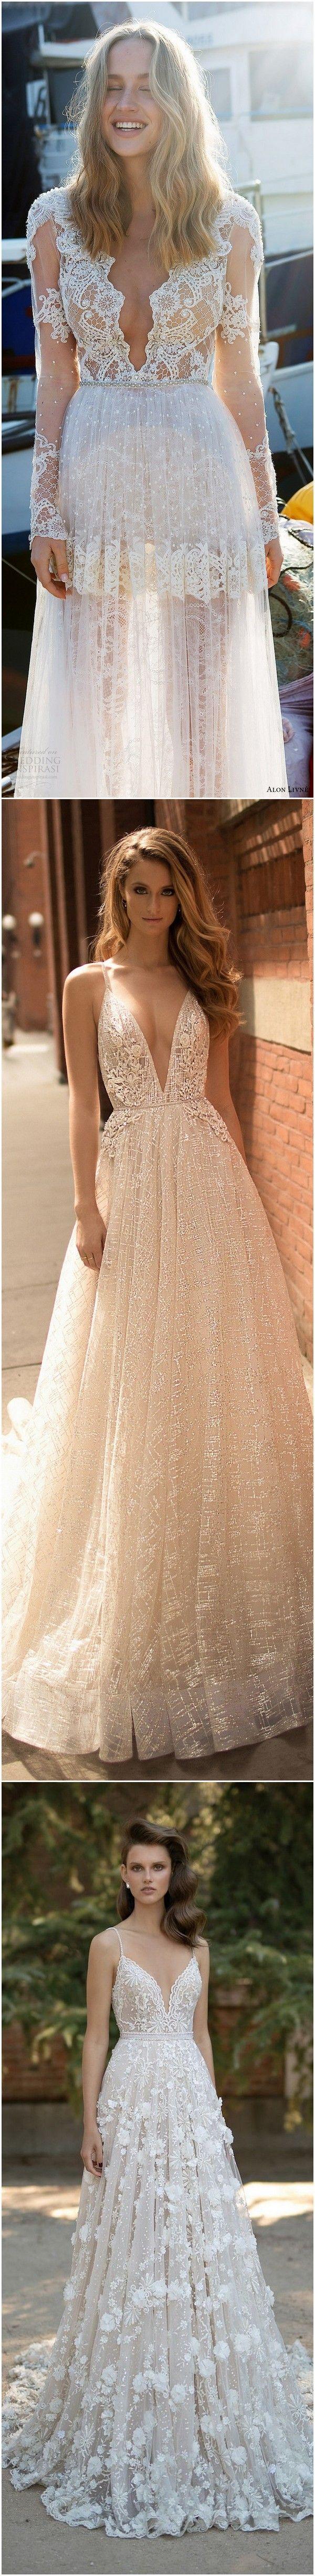 Mariage - Top 20 Vintage Wedding Dresses For 2017 Trends - Page 4 Of 4